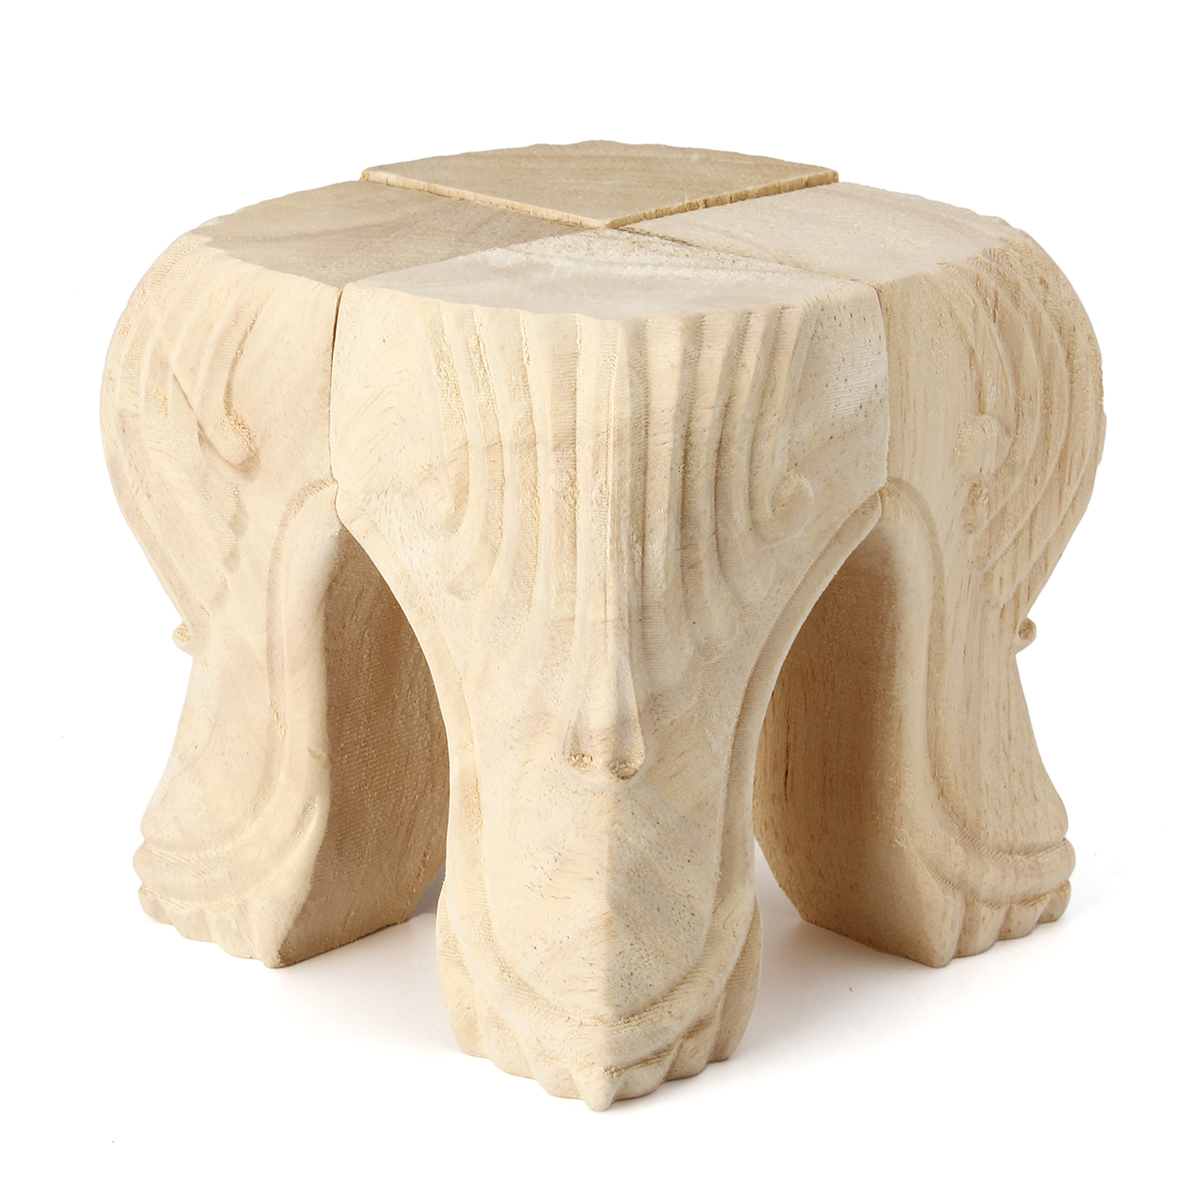 4Pcs-1015cm-European-Solid-Wood-Carving-Furniture-Foot-Legs-Unpainted-Couch-Cabinet-Sofa-Seat-Feets-1321345-3